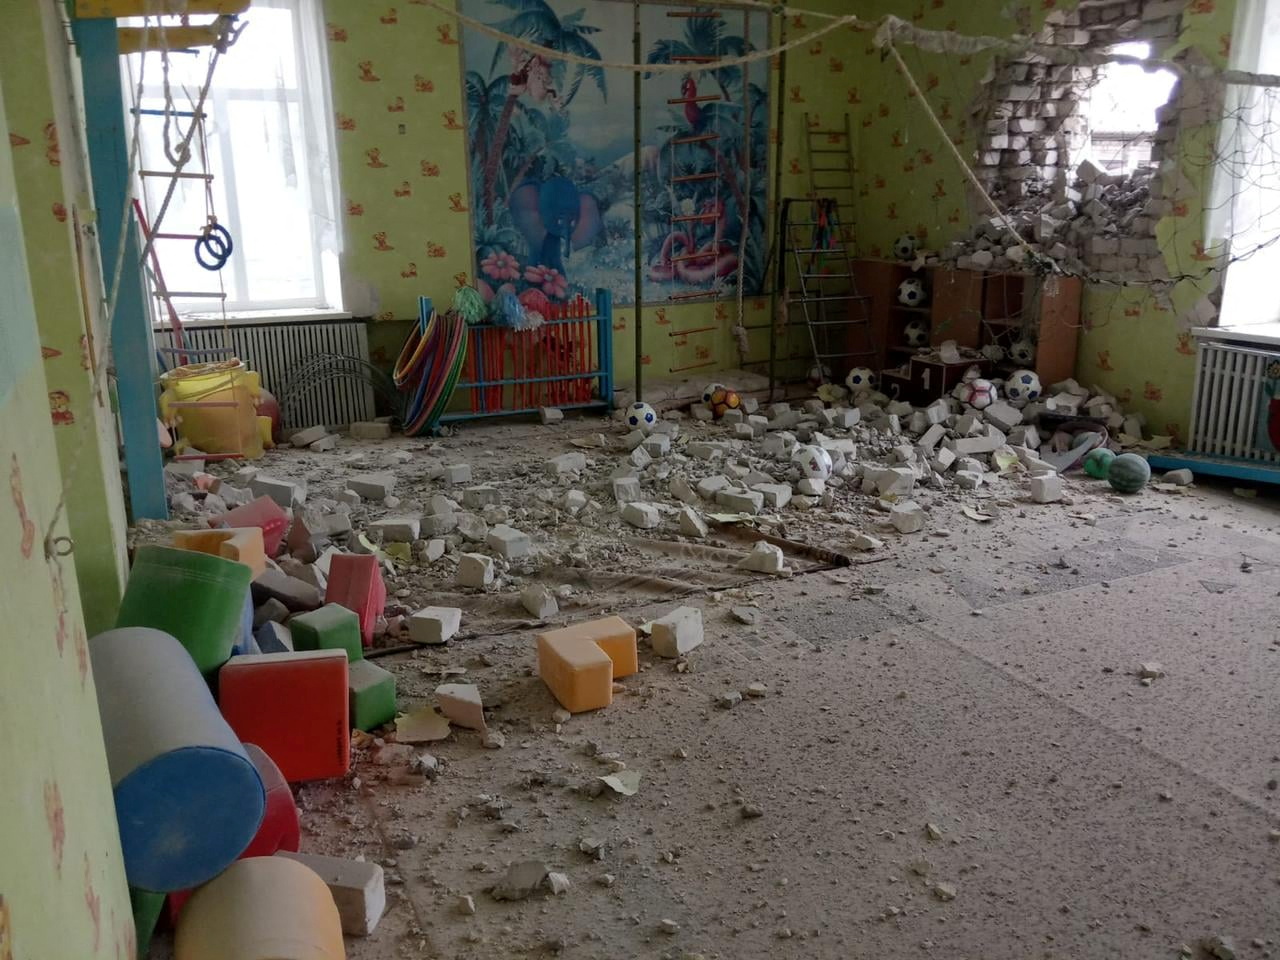 An interior view shows a kindergarten, which according to Ukraine's military officials was damaged by shelling, in Stanytsia Luhanska in the Luhansk region, Ukraine, in this handout picture released February 17, 2022. Press Service of the Joint Forces Operation/Handout via REUTERS 